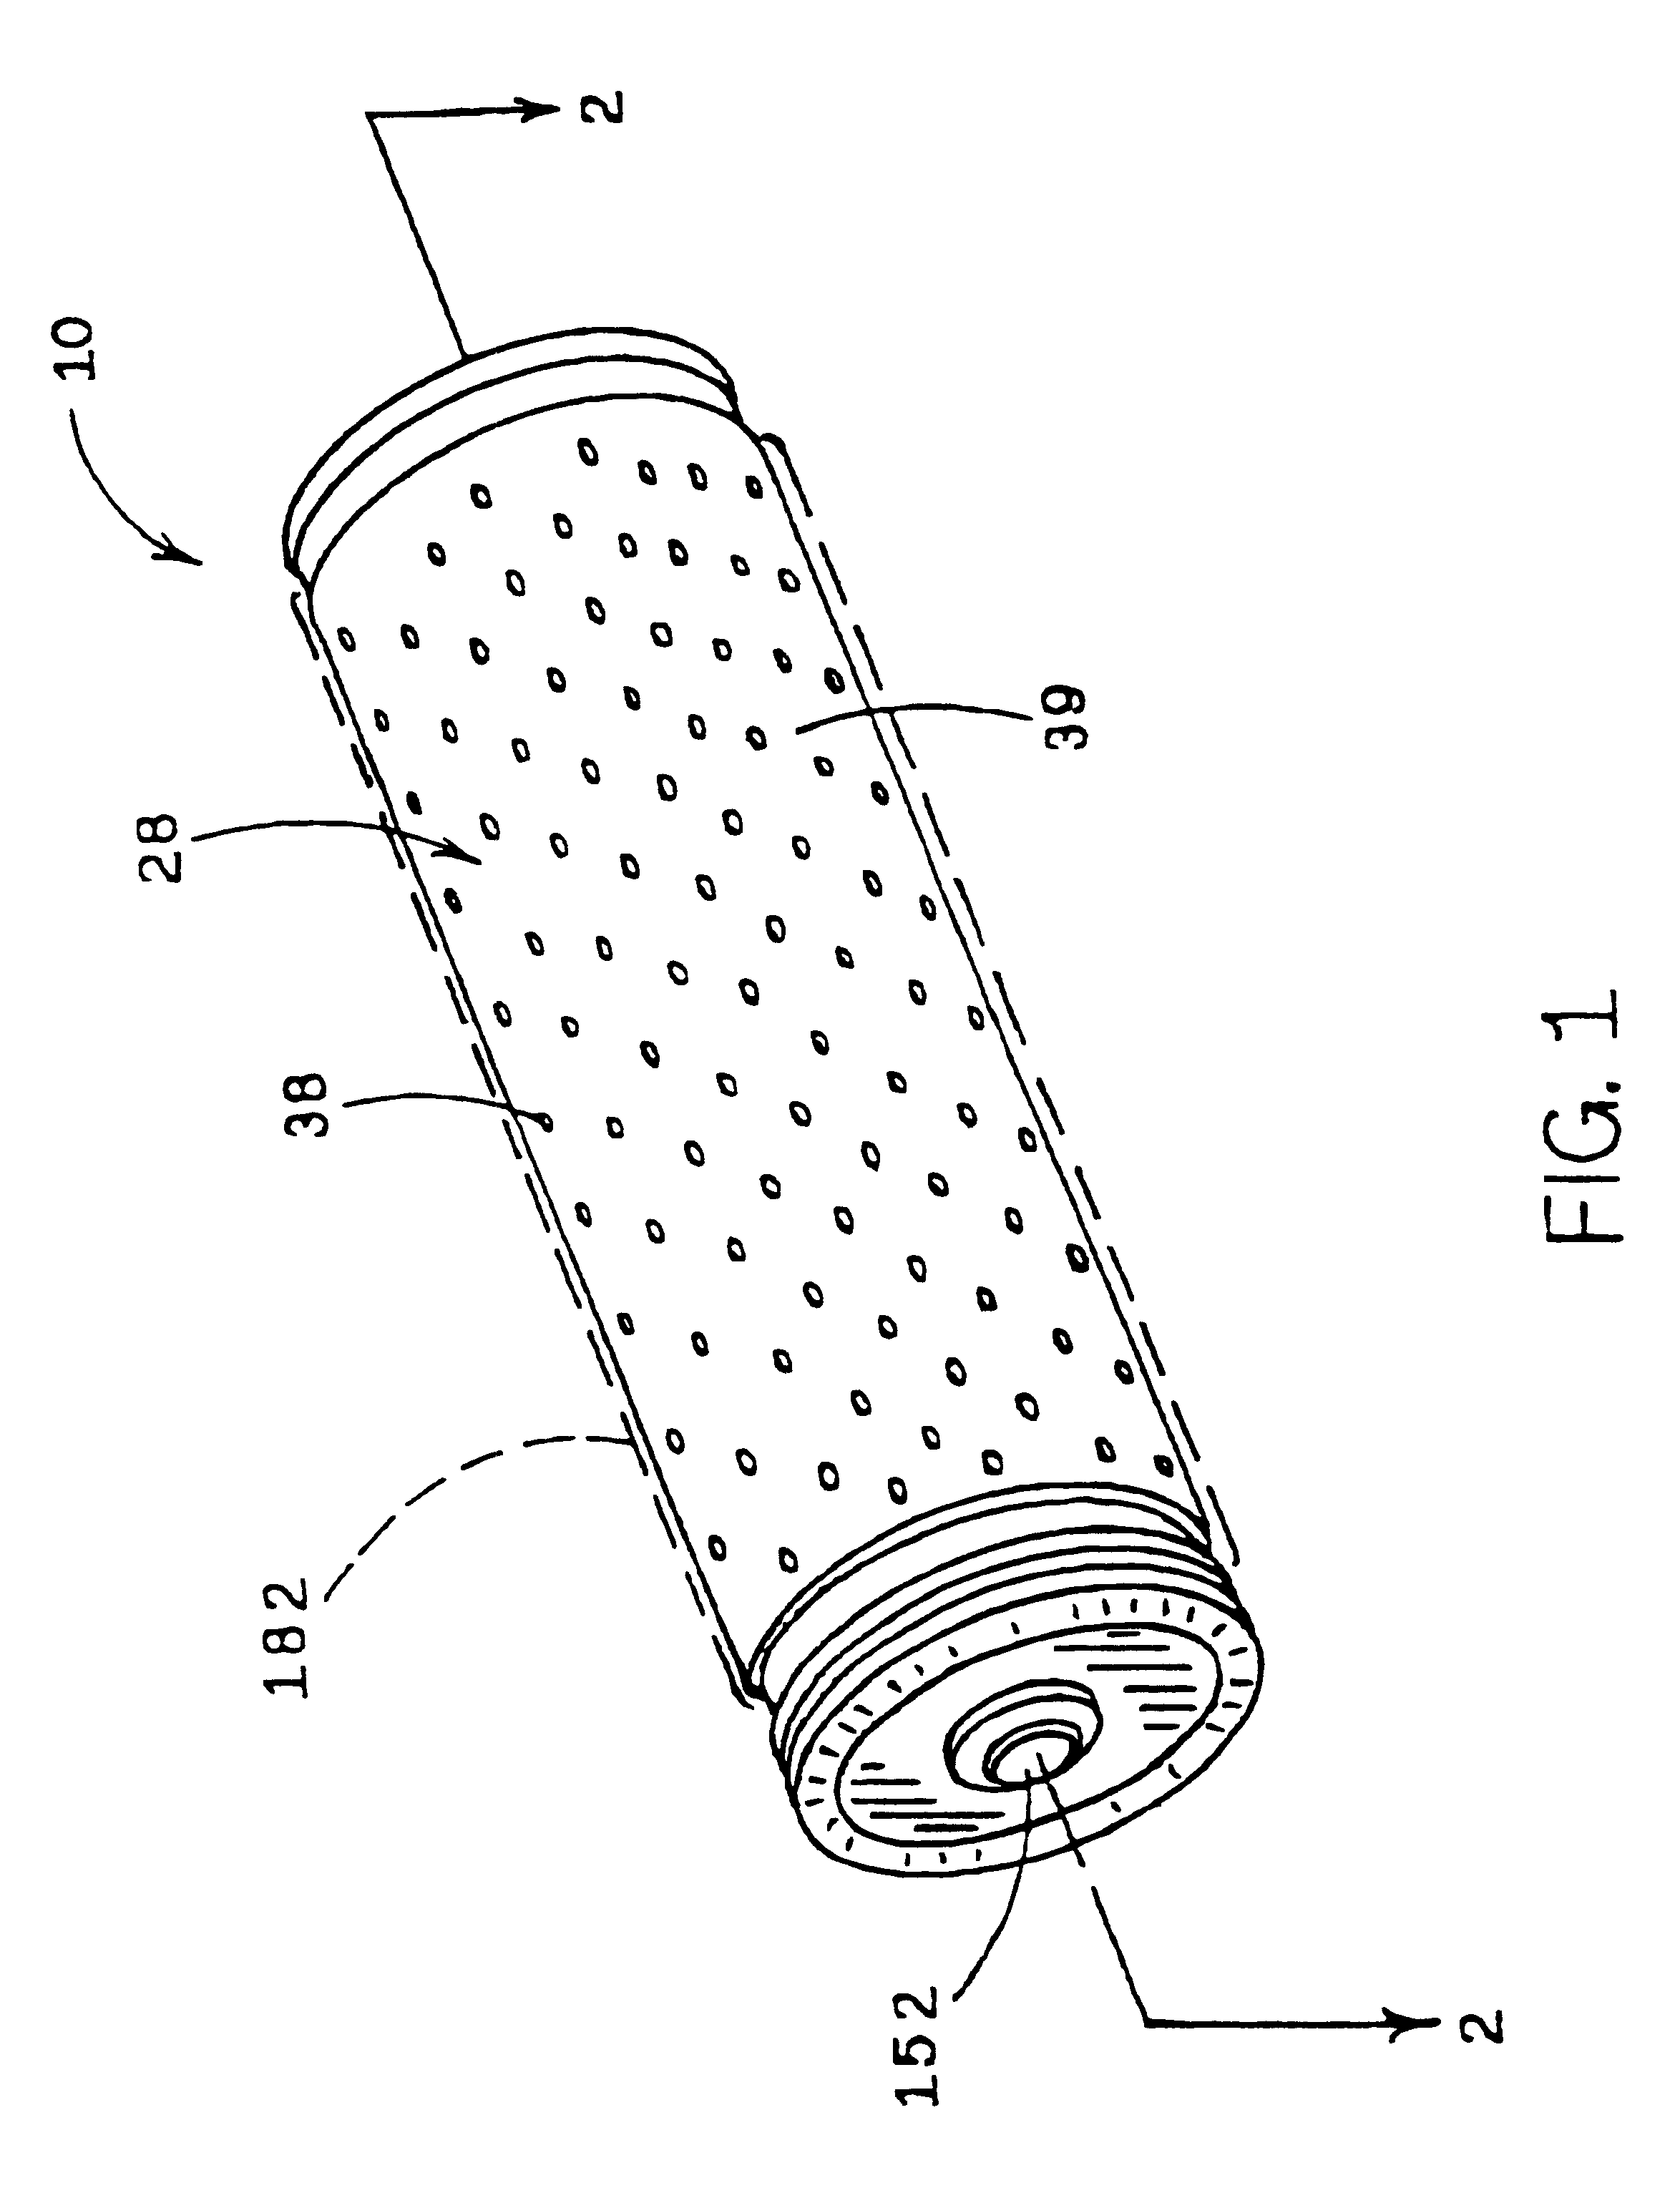 Air depolarized electrochemical cell